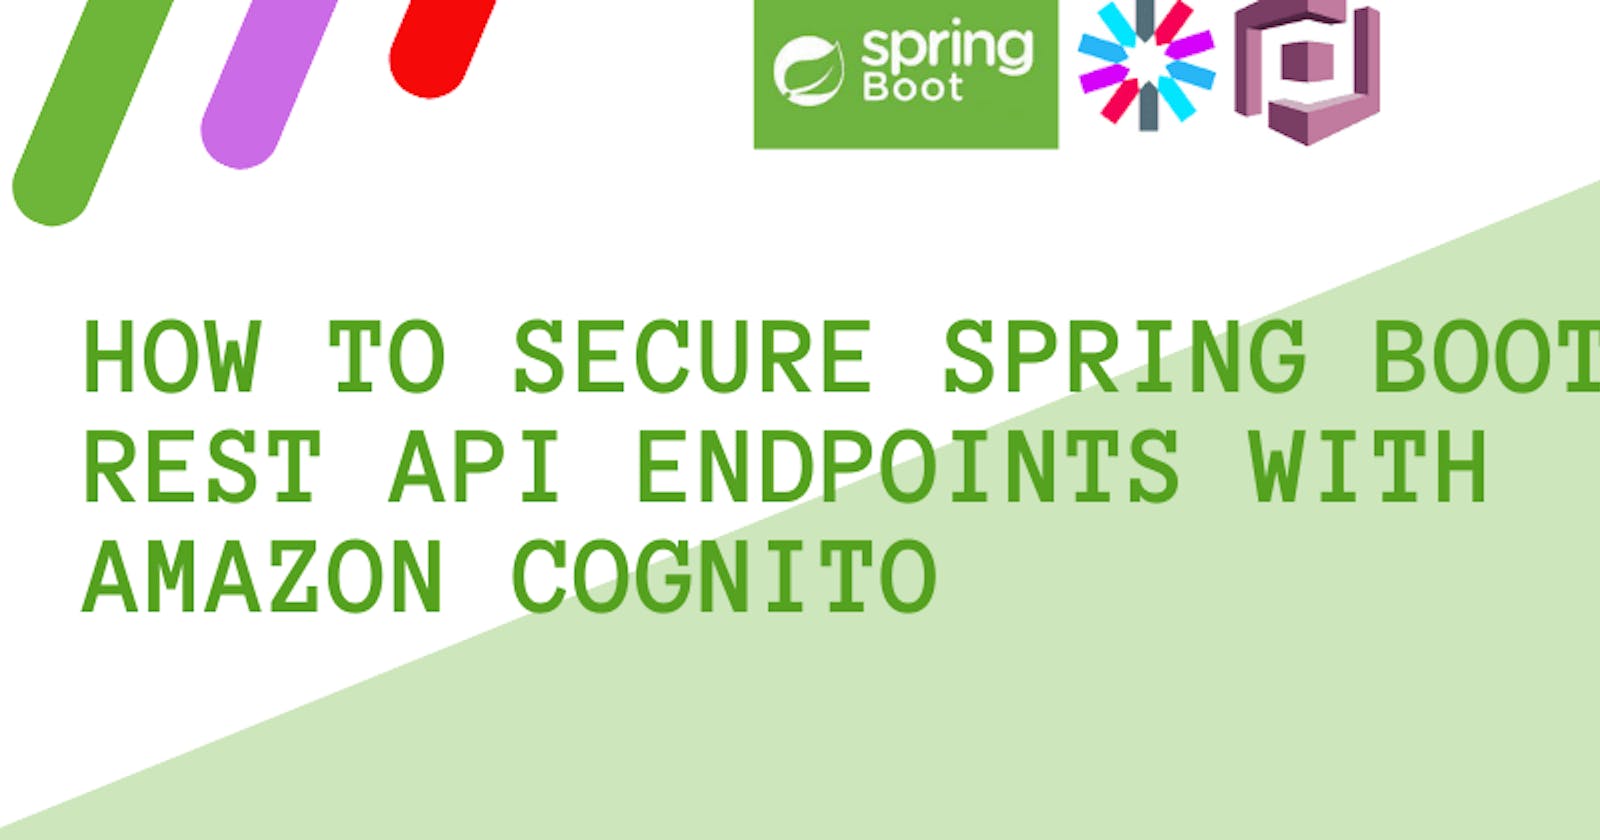 How to secure Spring boot REST API endpoints with Amazon Cognito